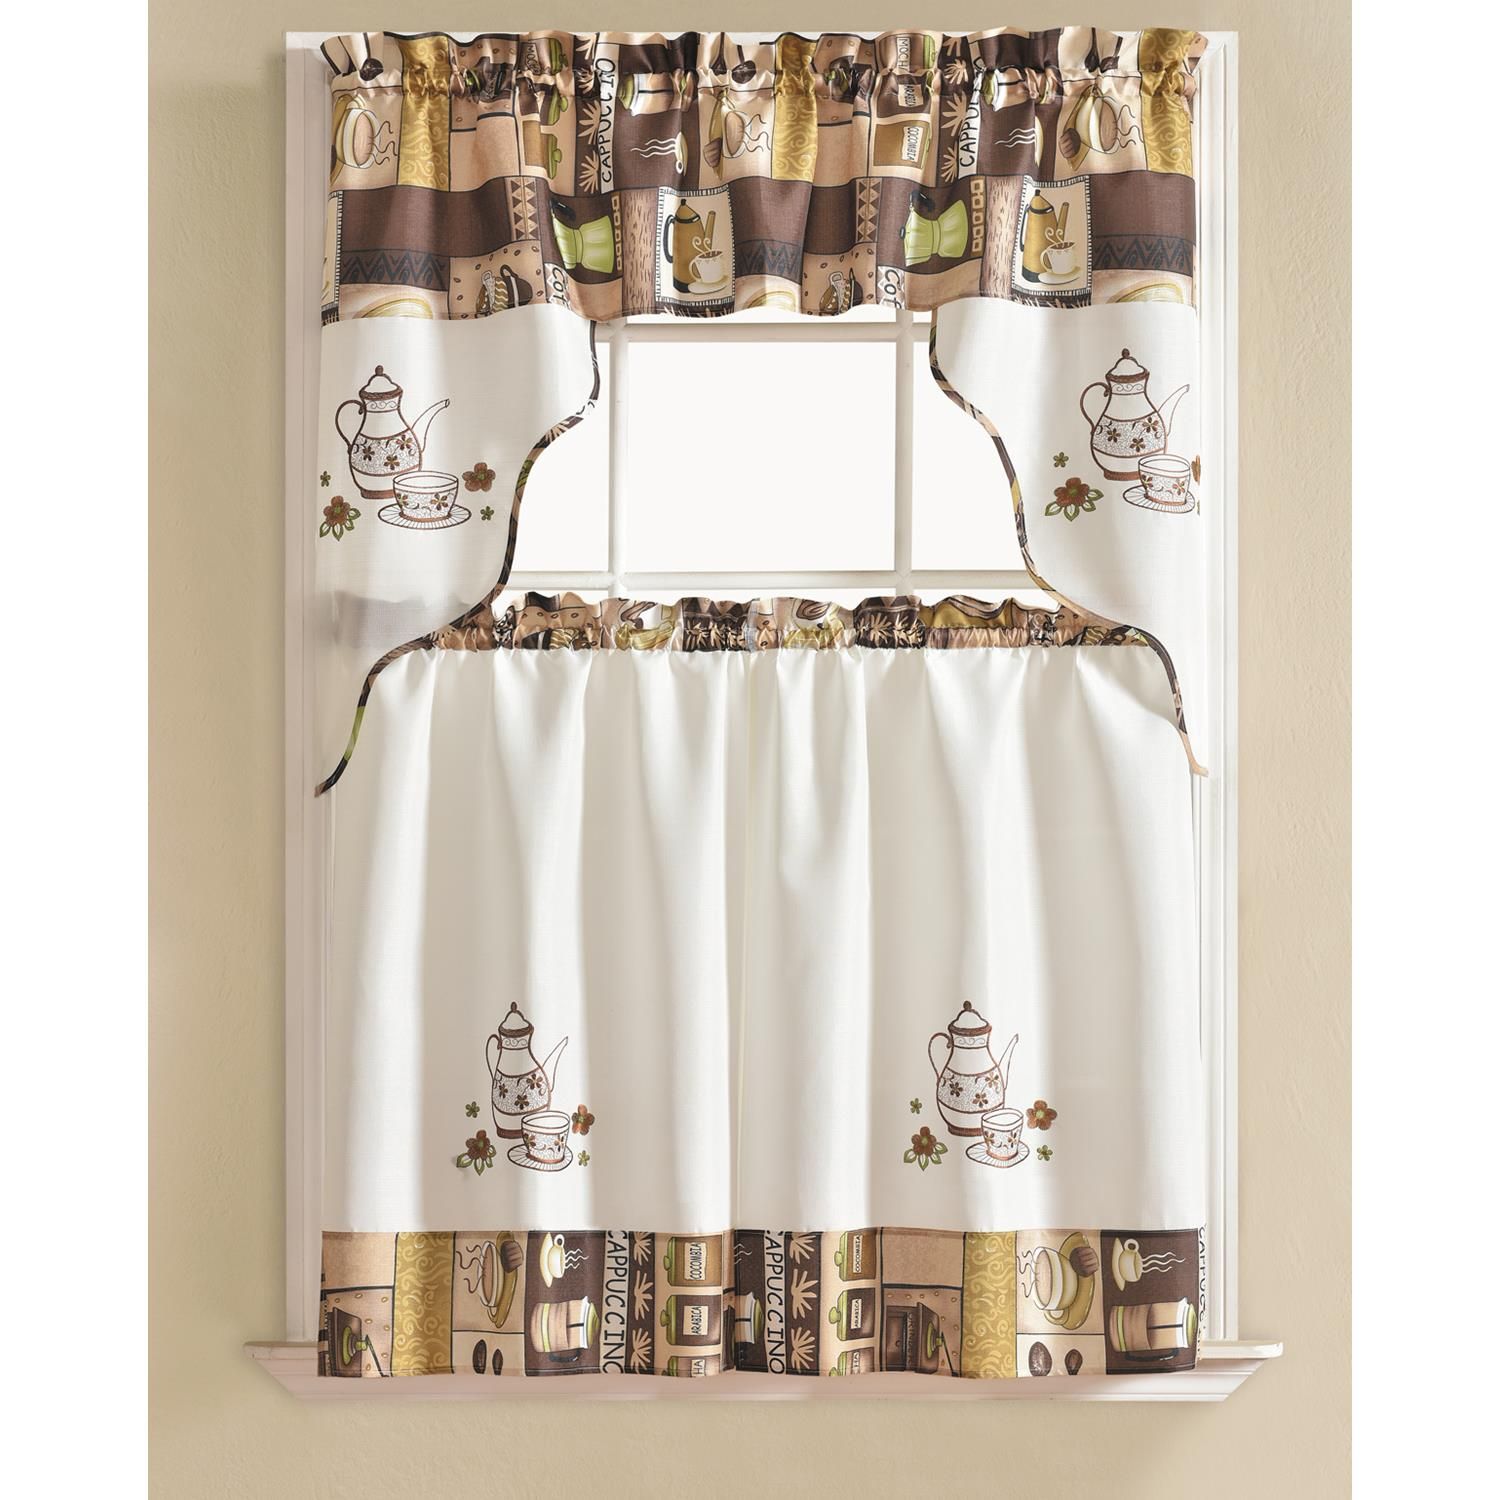 Details About Urban Embroidered Coffee Tier And Valance Kitchen Curtain Set Regarding Urban Embroidered Tier And Valance Kitchen Curtain Tier Sets (View 2 of 20)